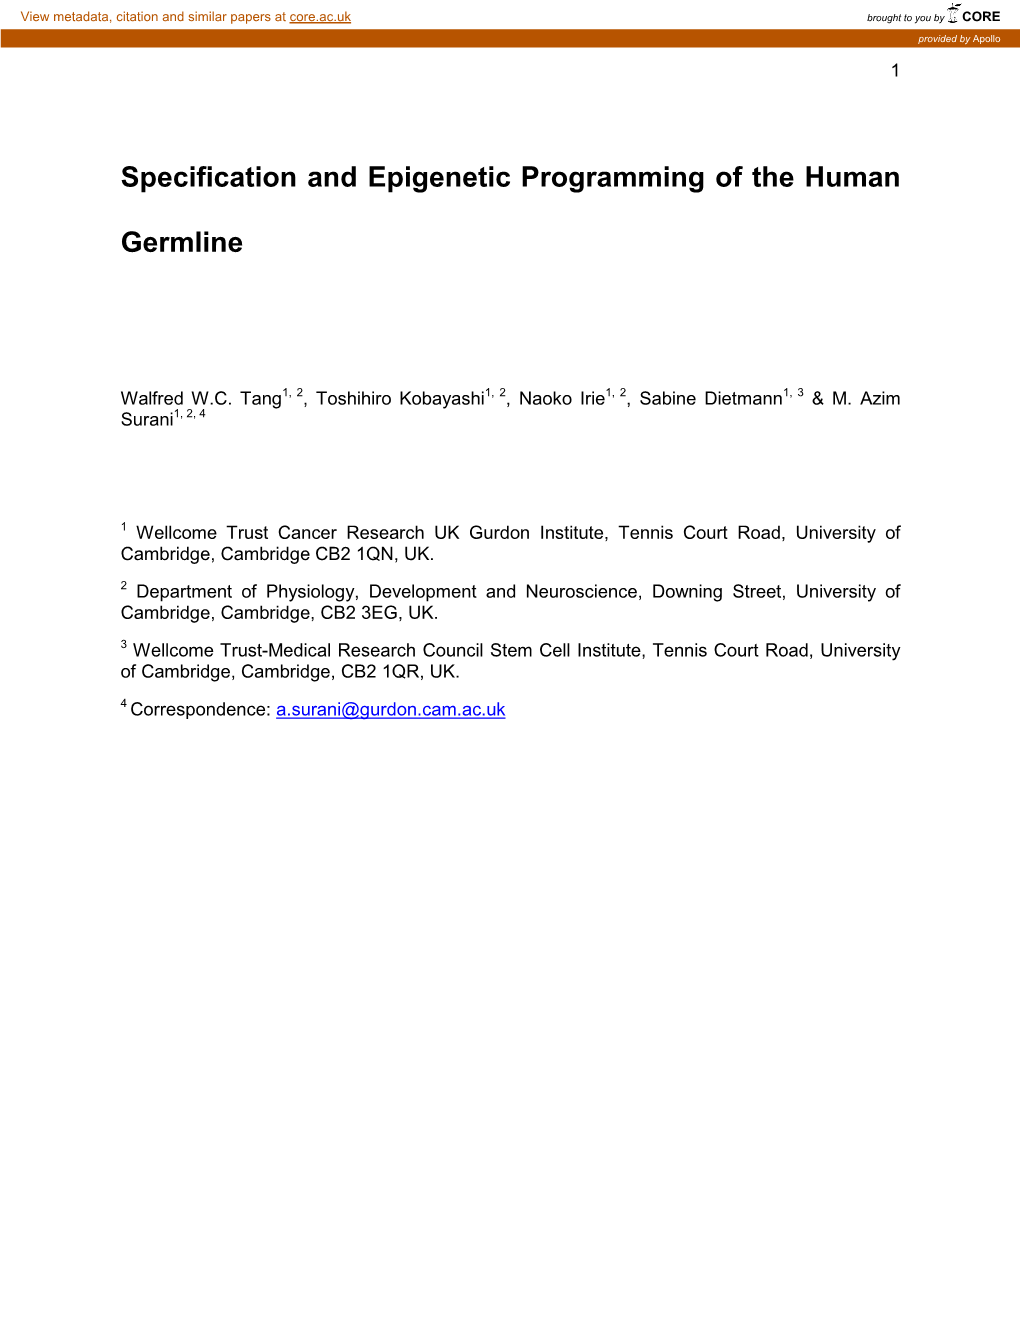 Specification and Epigenetic Programming of the Human Germline